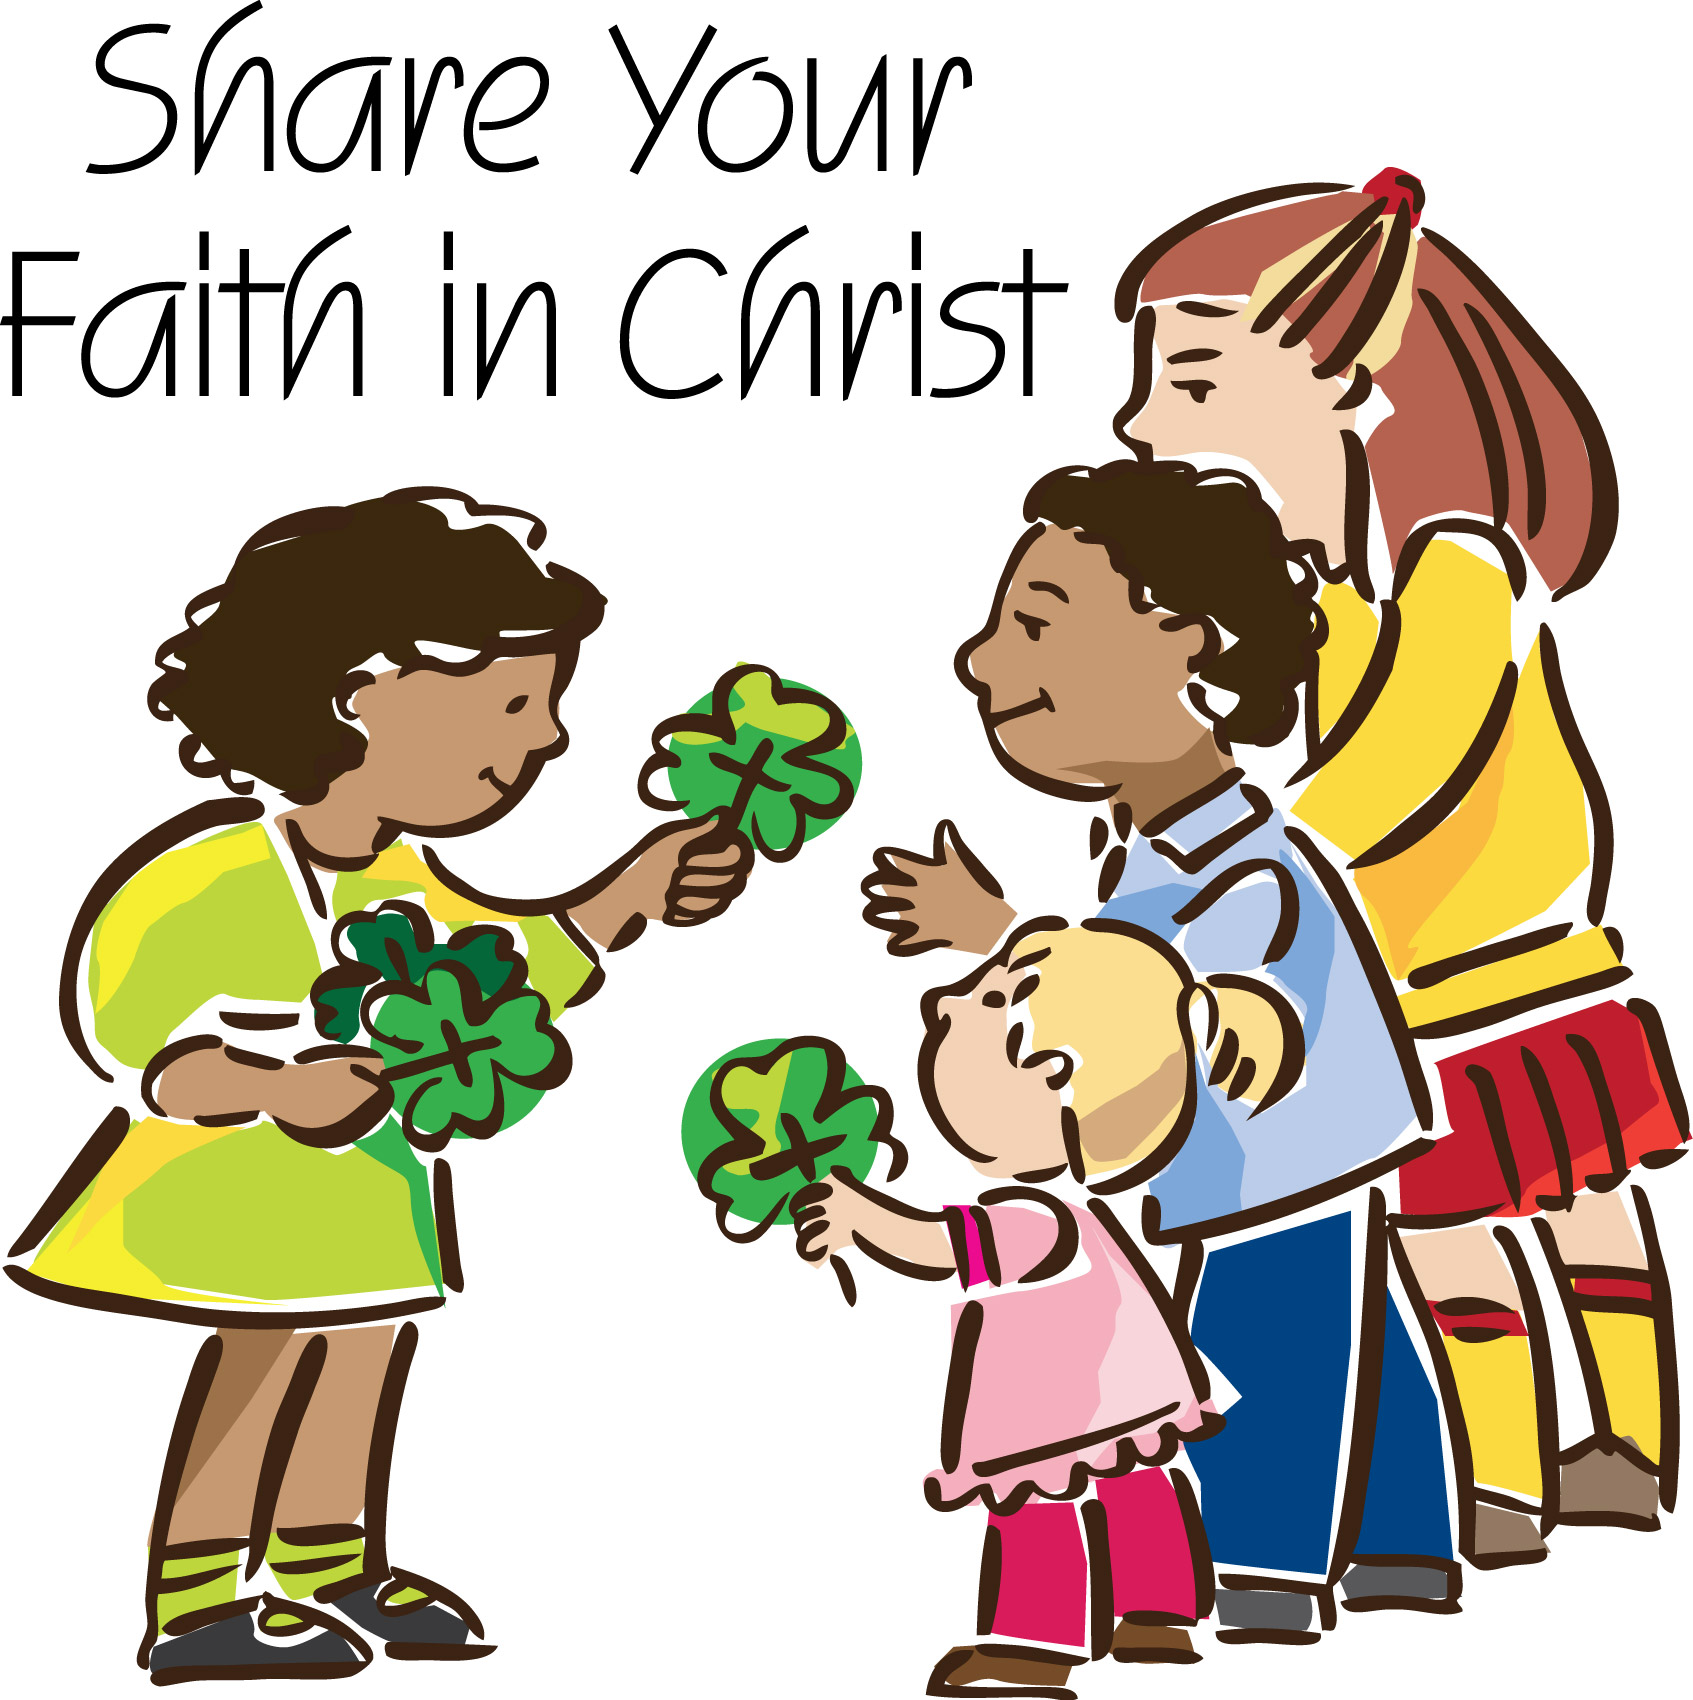 Sunday School Clip Art | Clipart library - Free Clipart Images